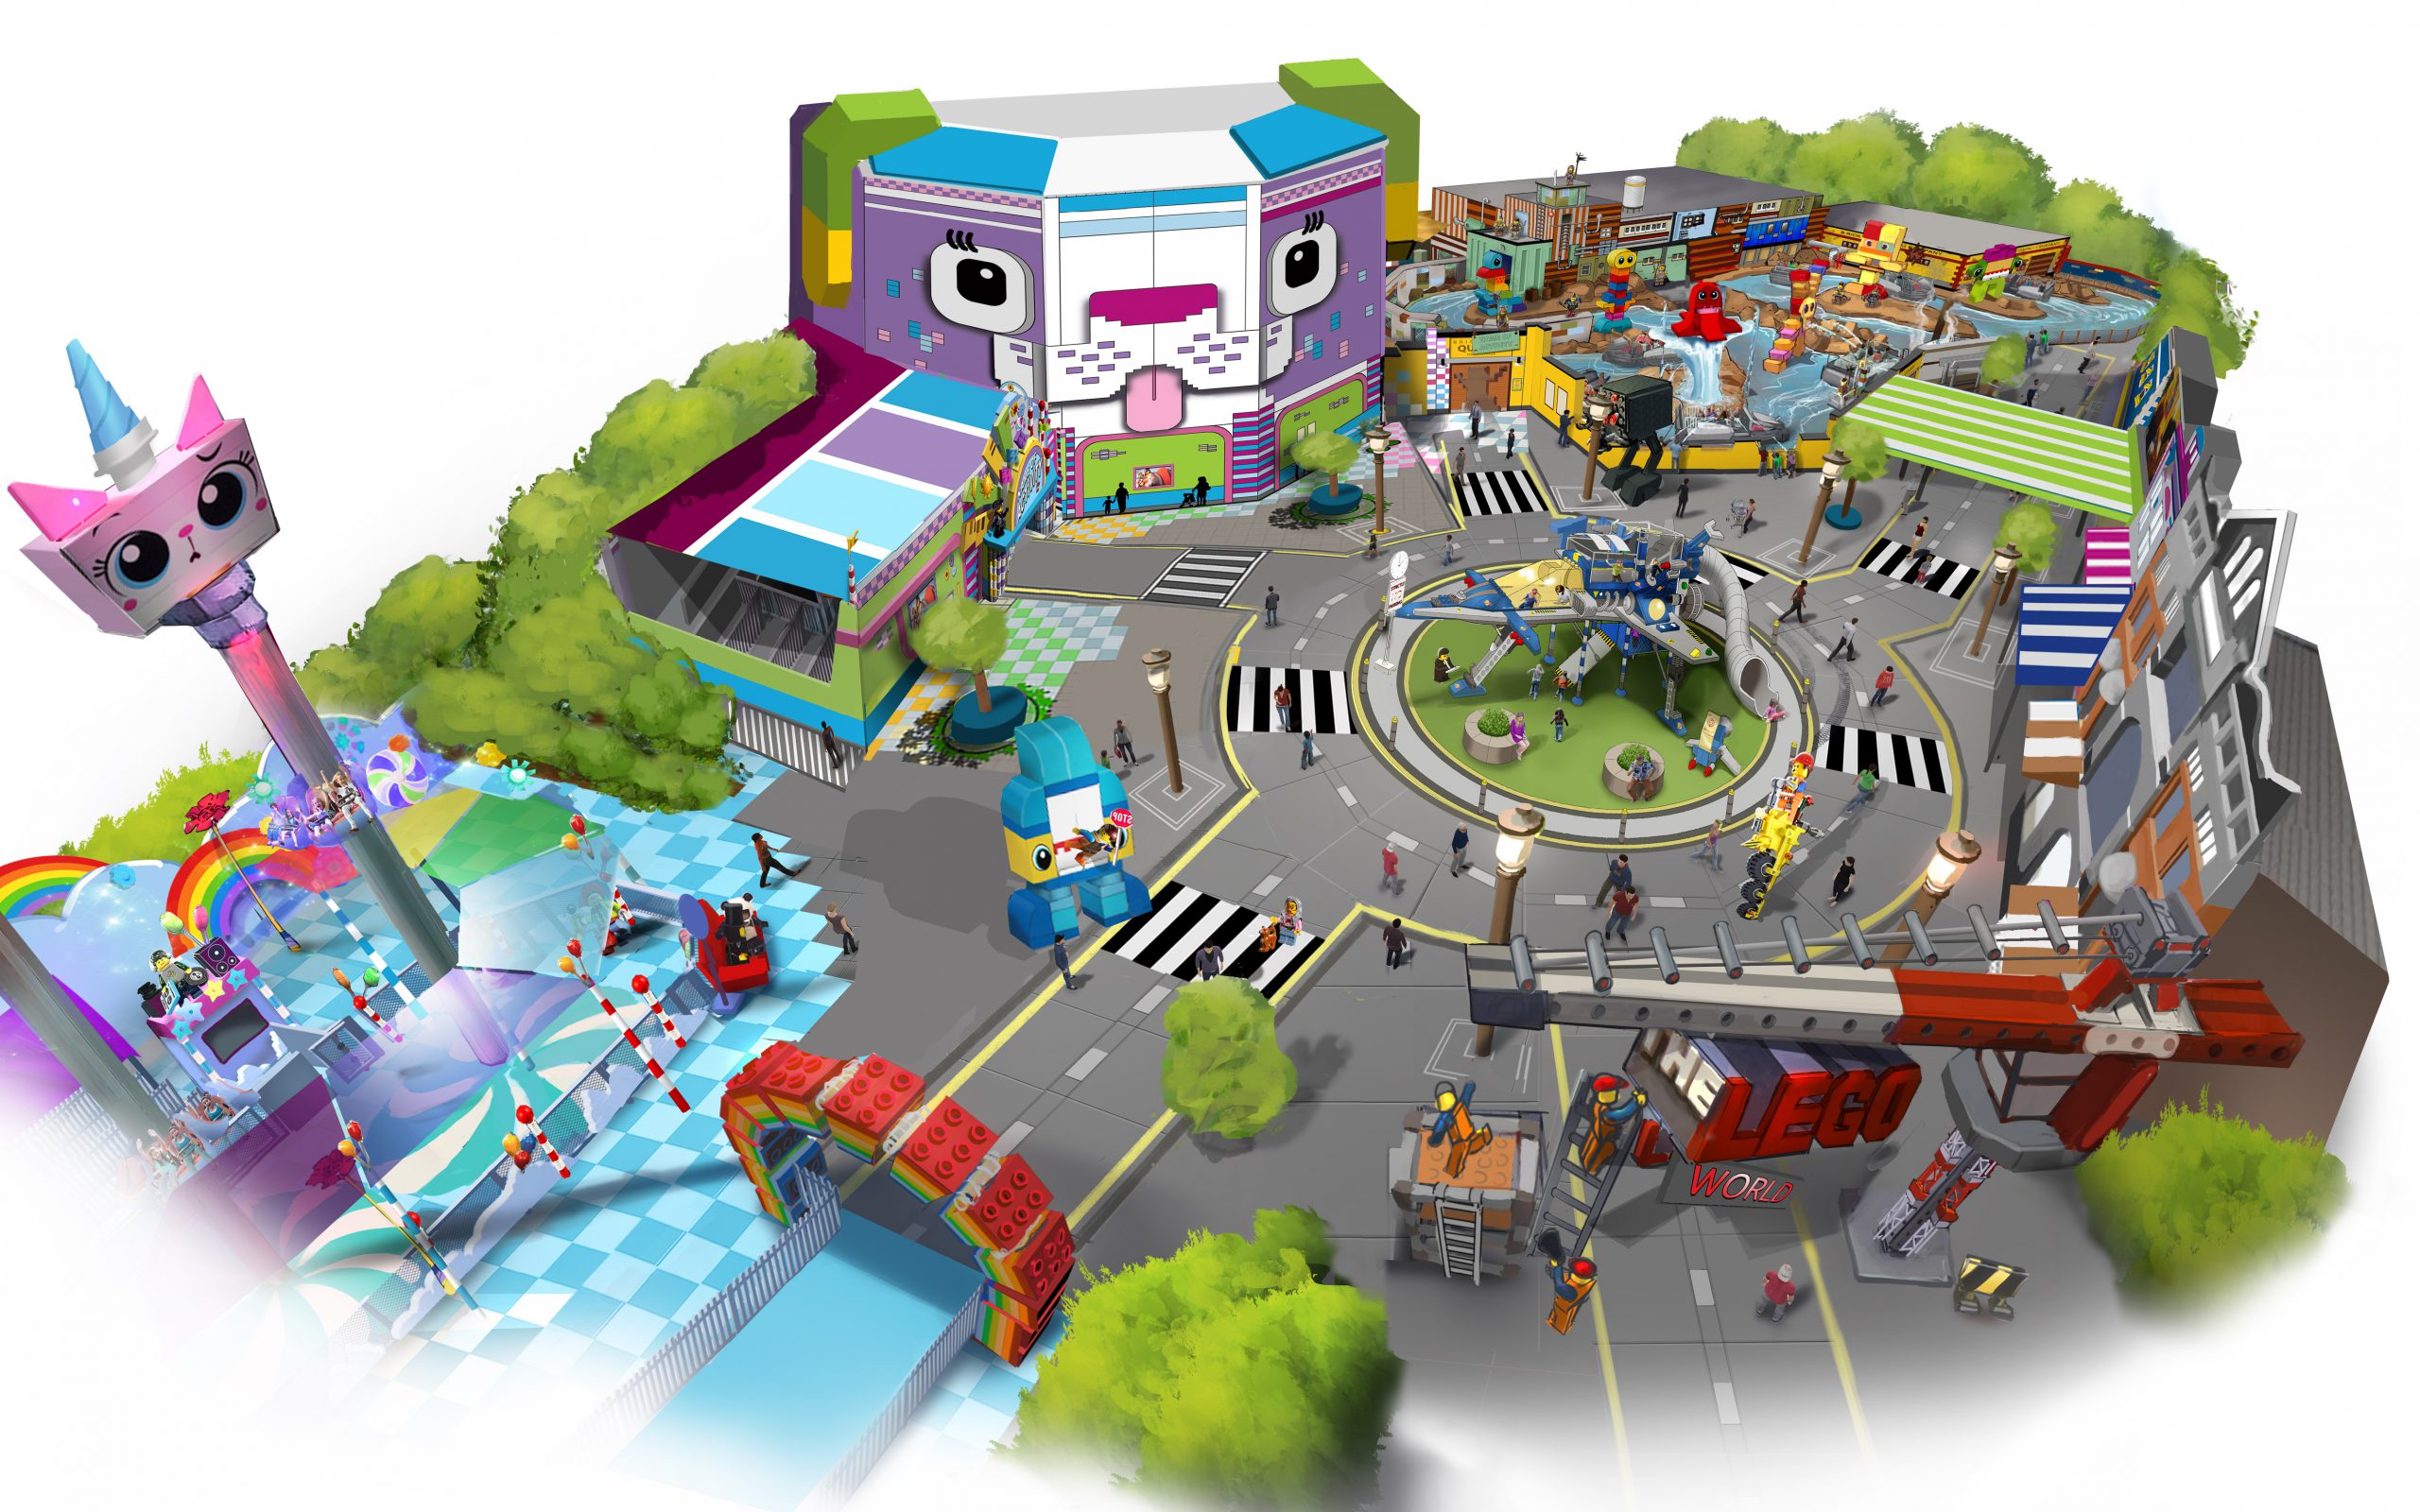 Unikitty themed drop tower area and walking areas